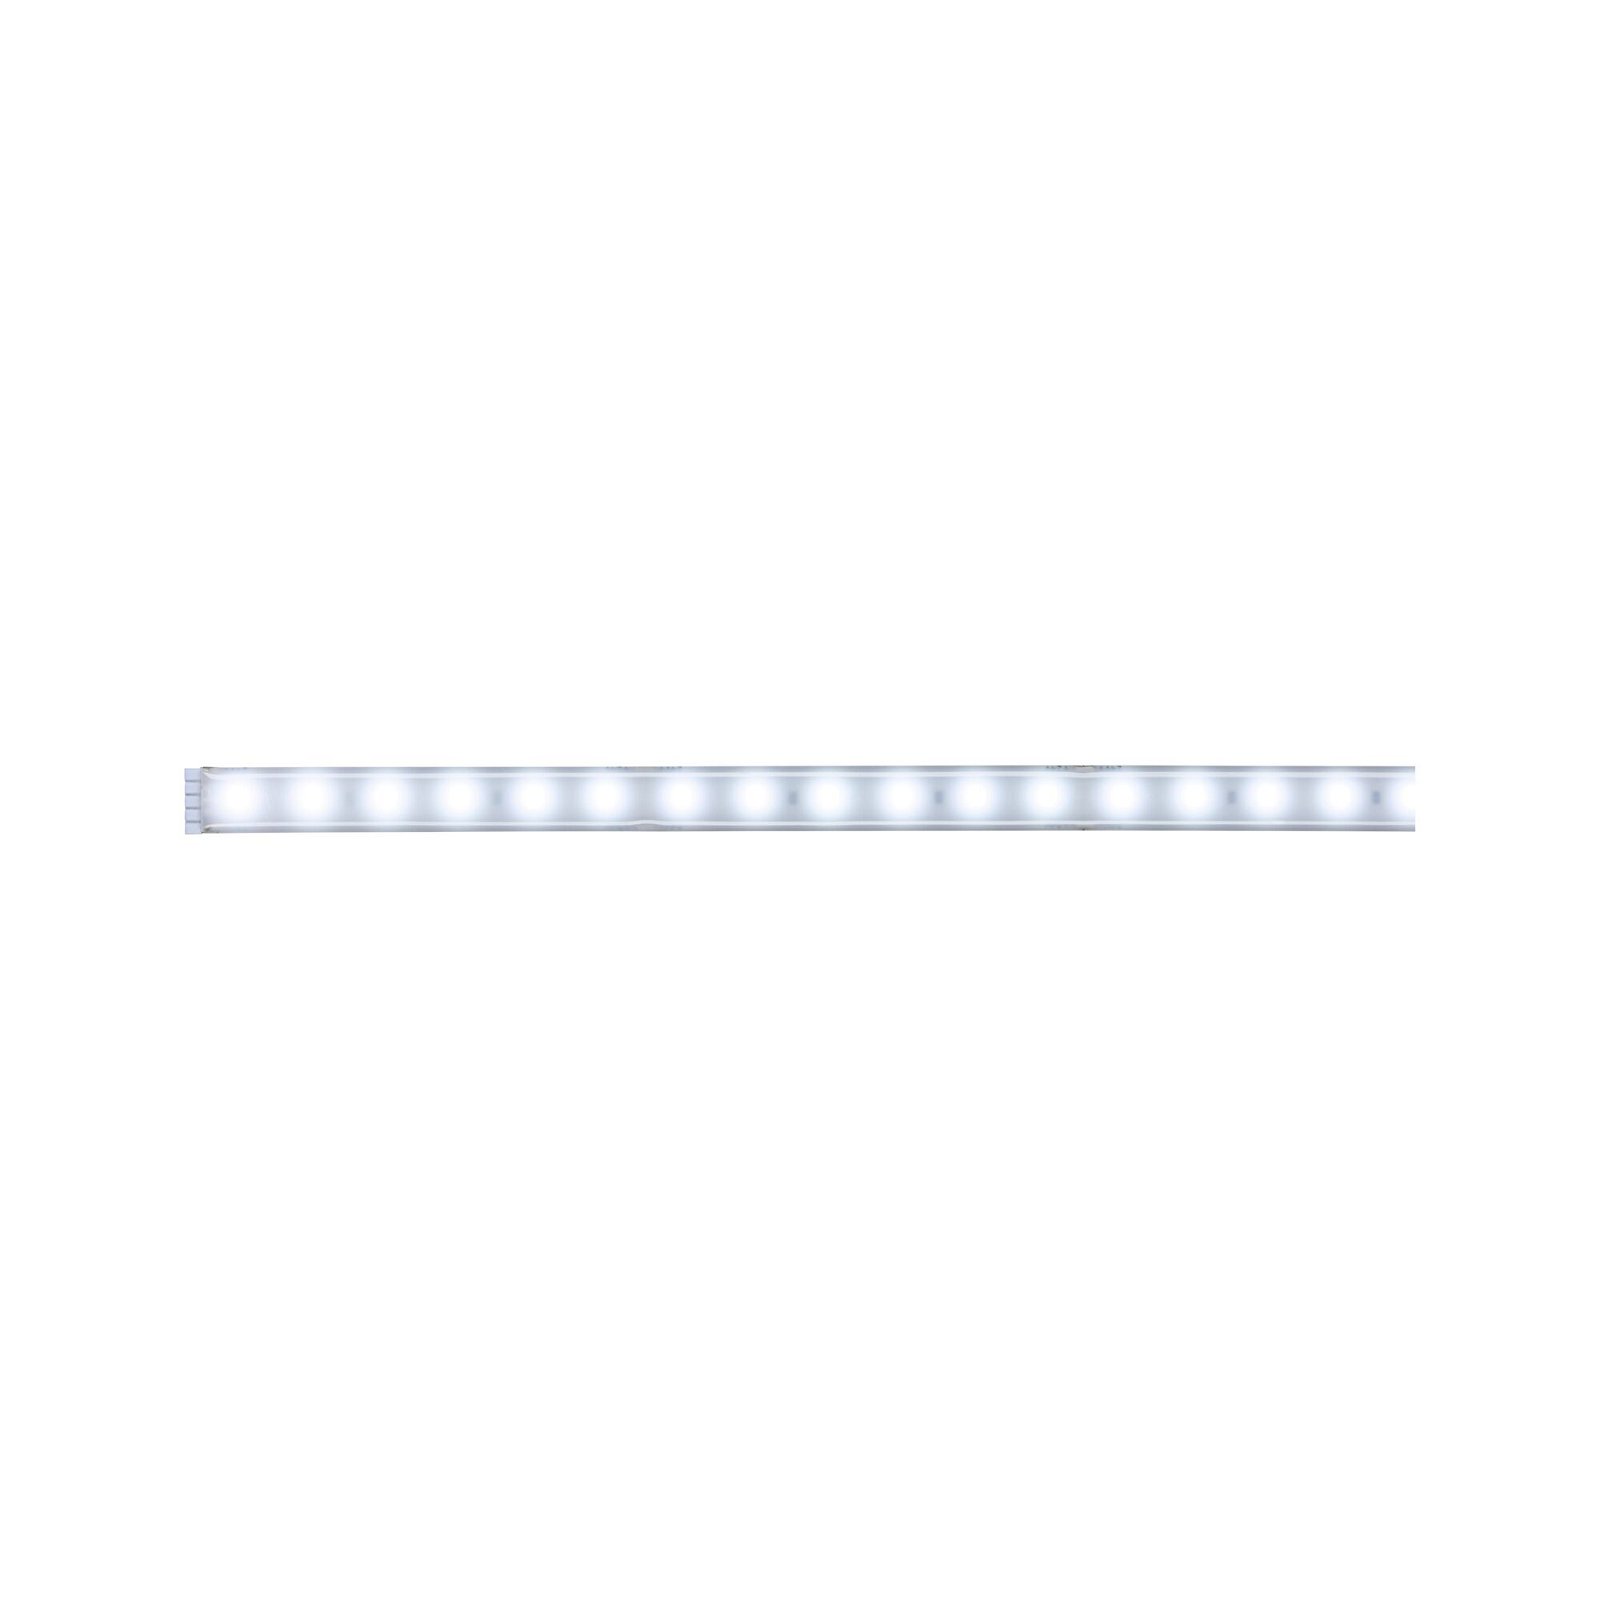 MaxLED 500 LED Strip Daylight white 1m protect cover 6W 440lm/m 6500K